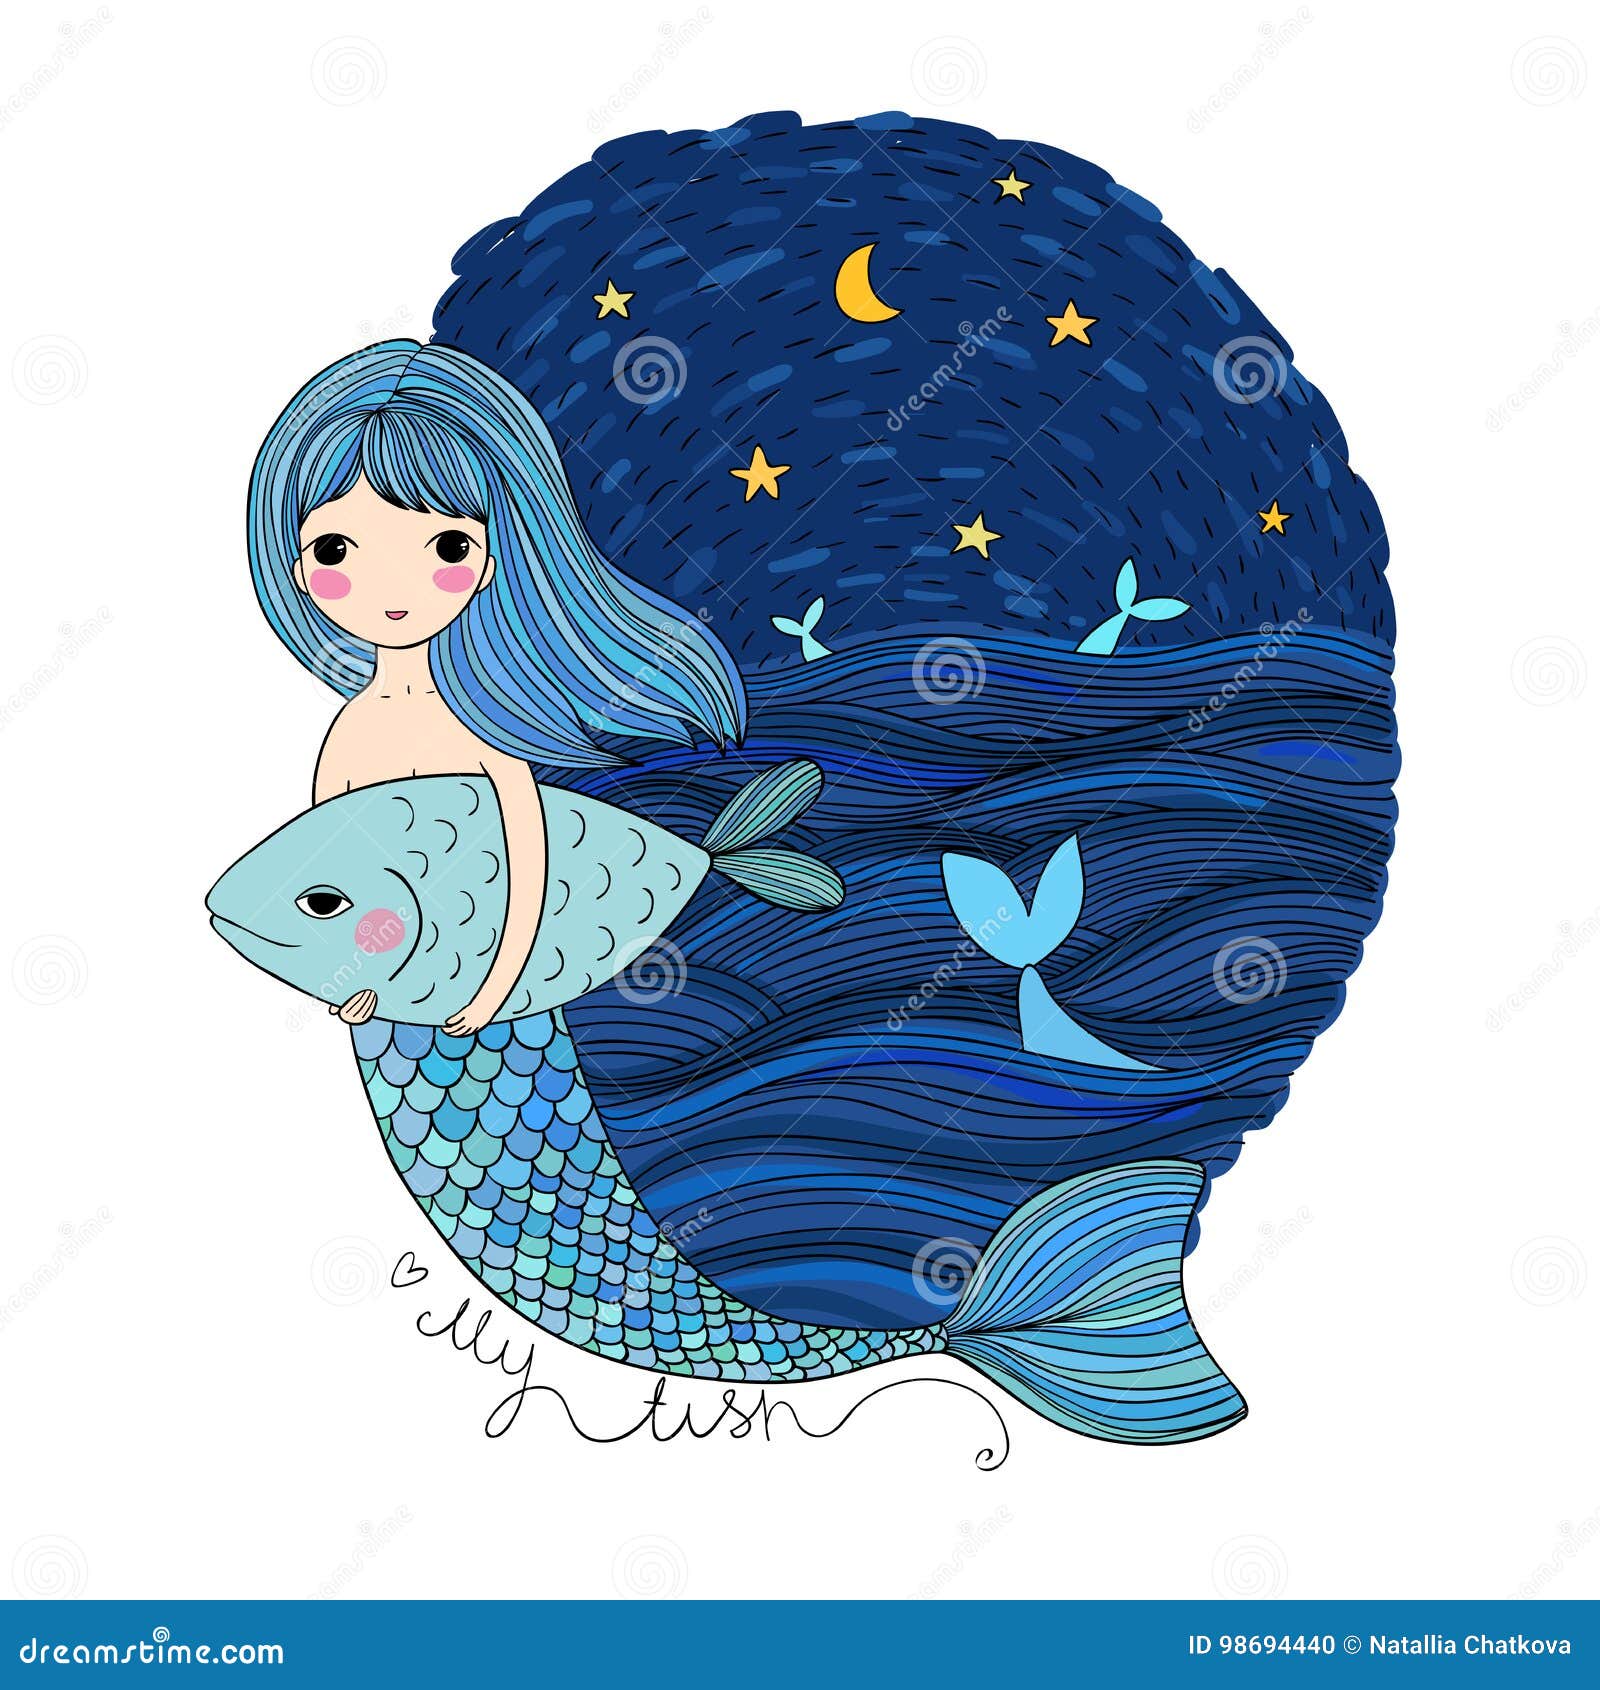 Cute Cartoon Mermaid and Fish. Siren. Sea Theme. Isolated Objects on White  Background Stock Vector - Illustration of sketch, character: 98694440